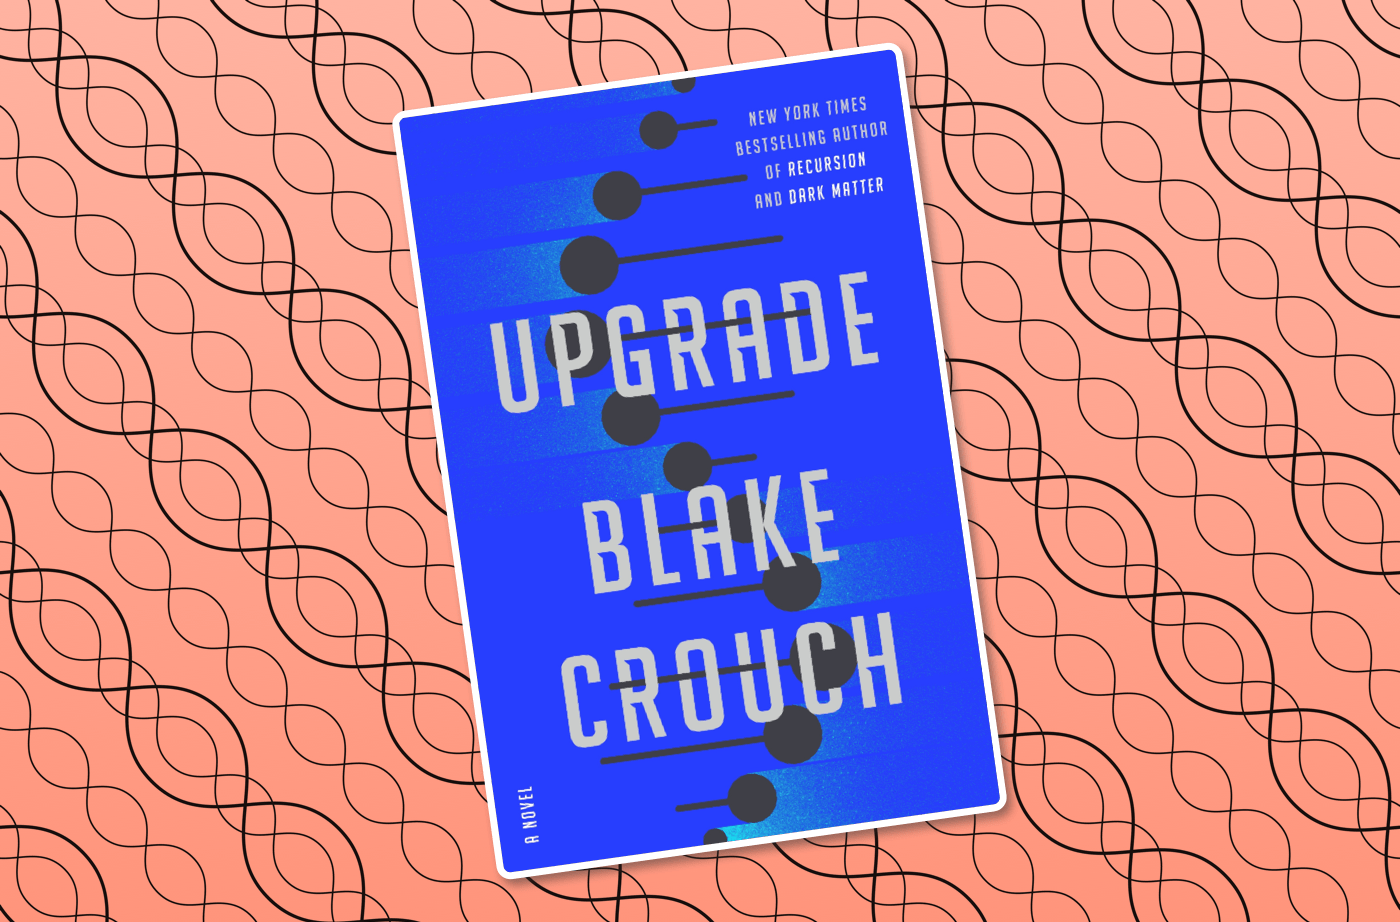 the book cover for Upgrade by Blake Crouch on top of a background made up of simplified dna strands